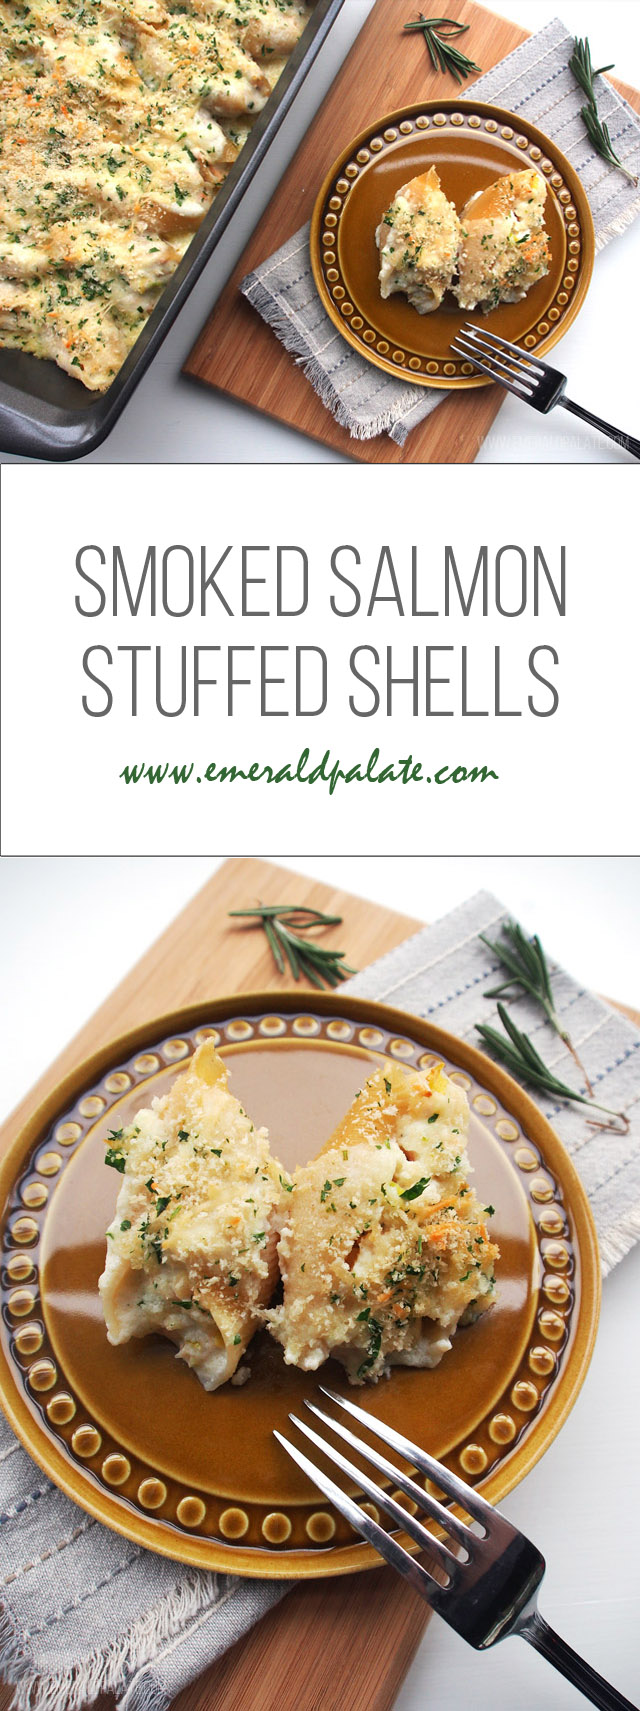 Looking for a smoked salmon pasta recipe? Try this stuffed shell recipe! It features smoked salmon from Seattle and is an easy recipe to make. It is perfect for the Feast of the Seven Fishes Christmas eve dinner! Read more if you are looking for canned smoked salmon recipes, smoked salmon seattle, or smoked salmon pasta inspiration.